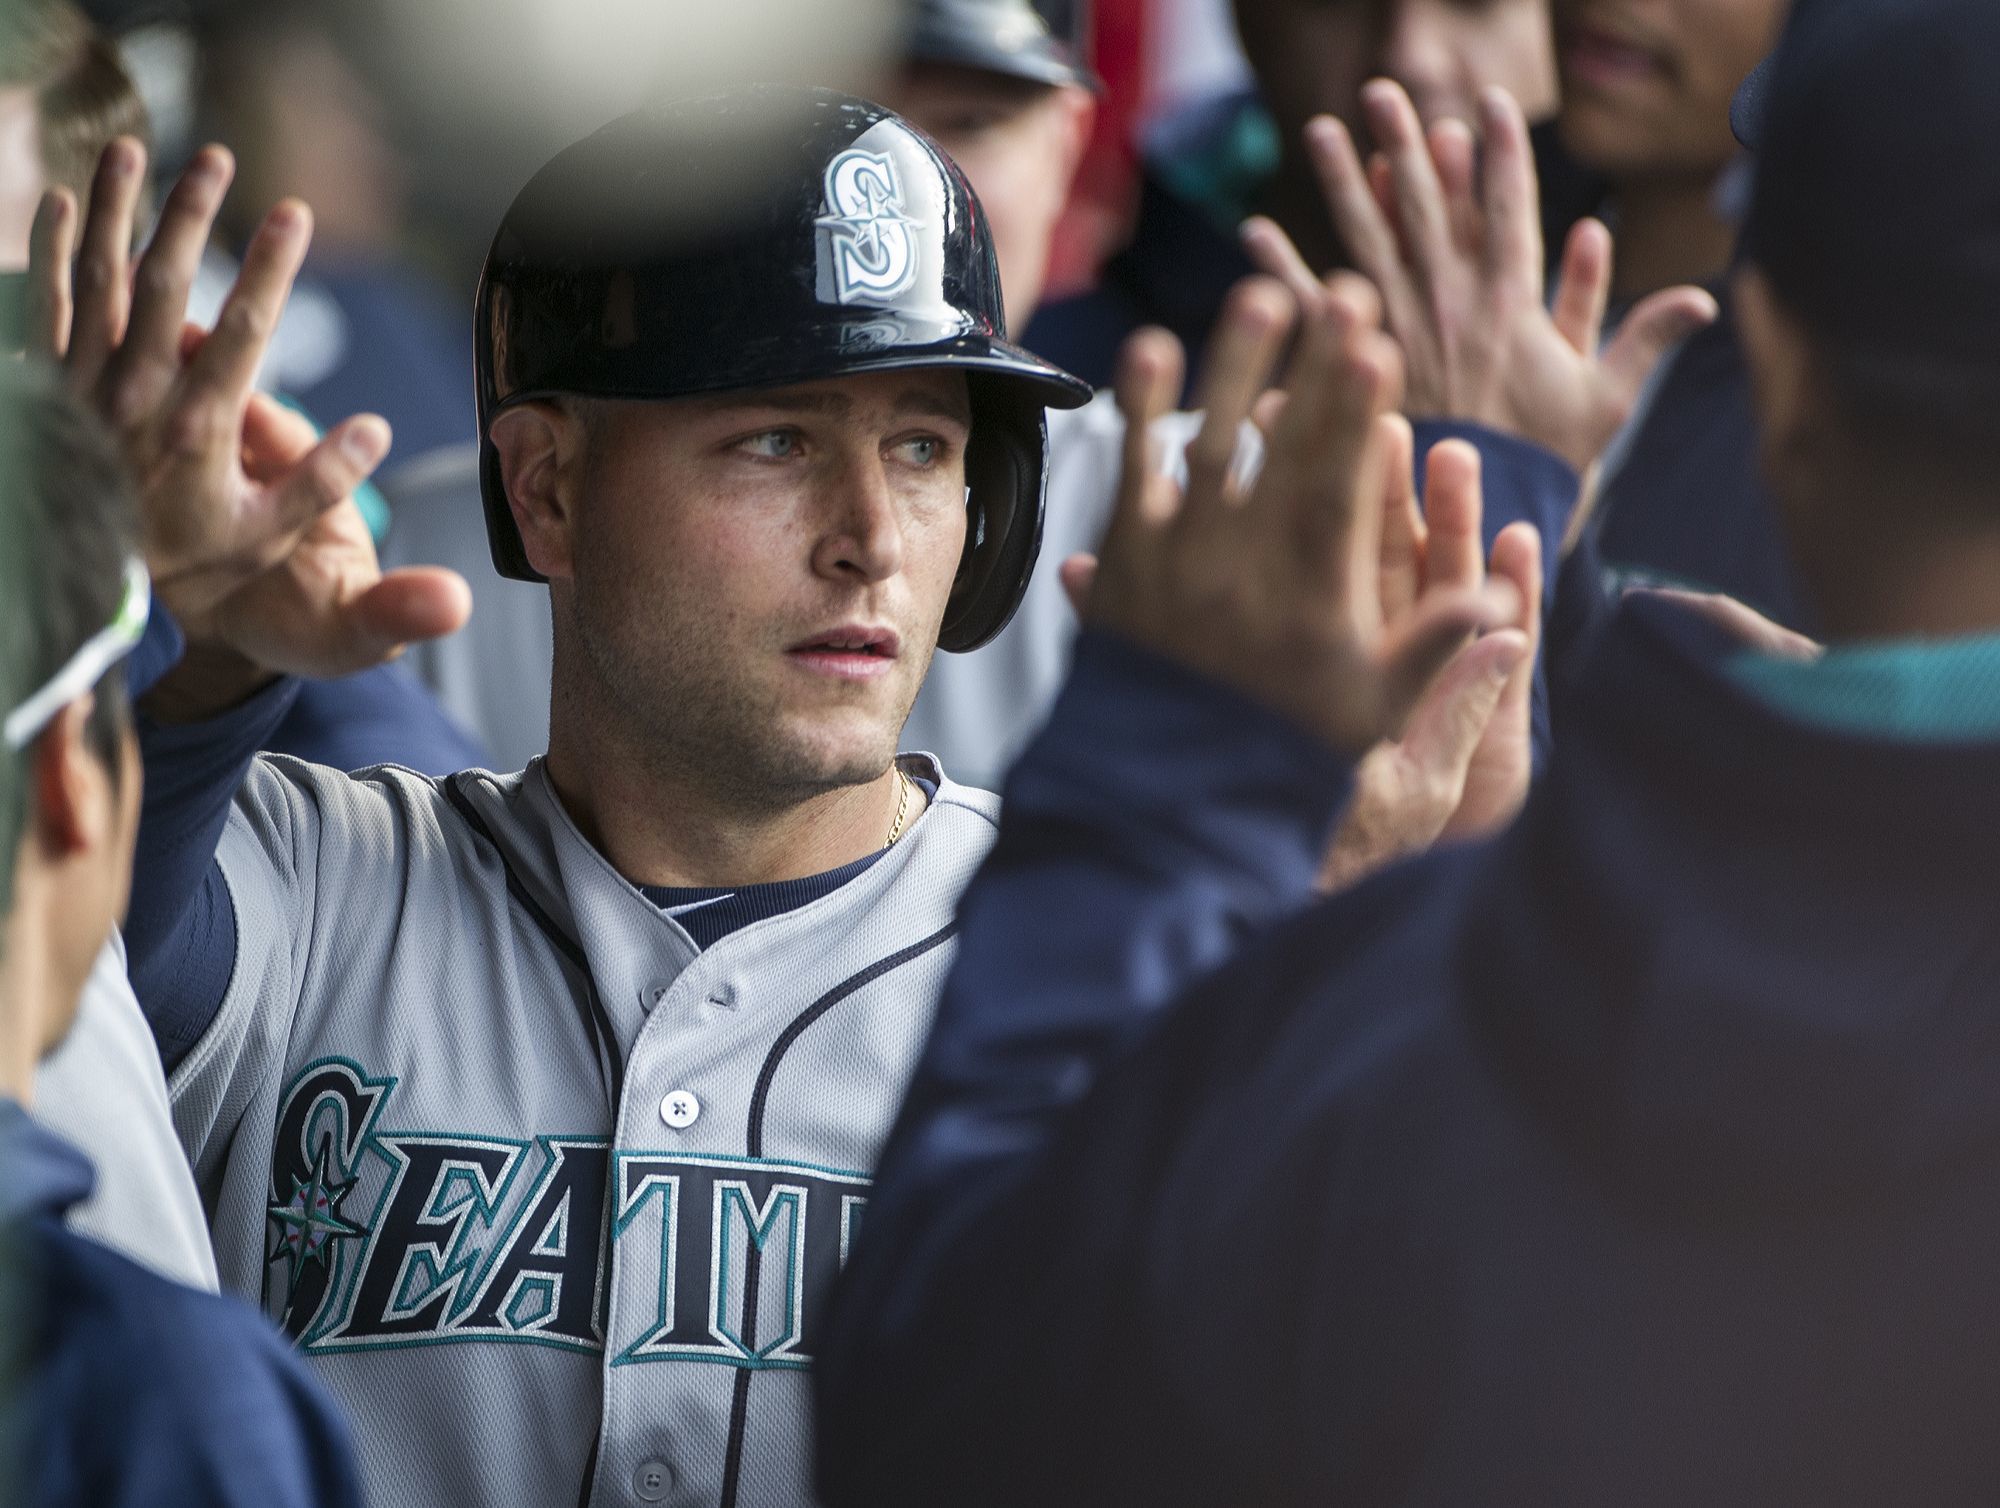 The Mariners Chris Iannetta is congratulated in the dugout after scoring on a two-run by the Mariners Nori Aoki in the second inning of Wednesday’s game.